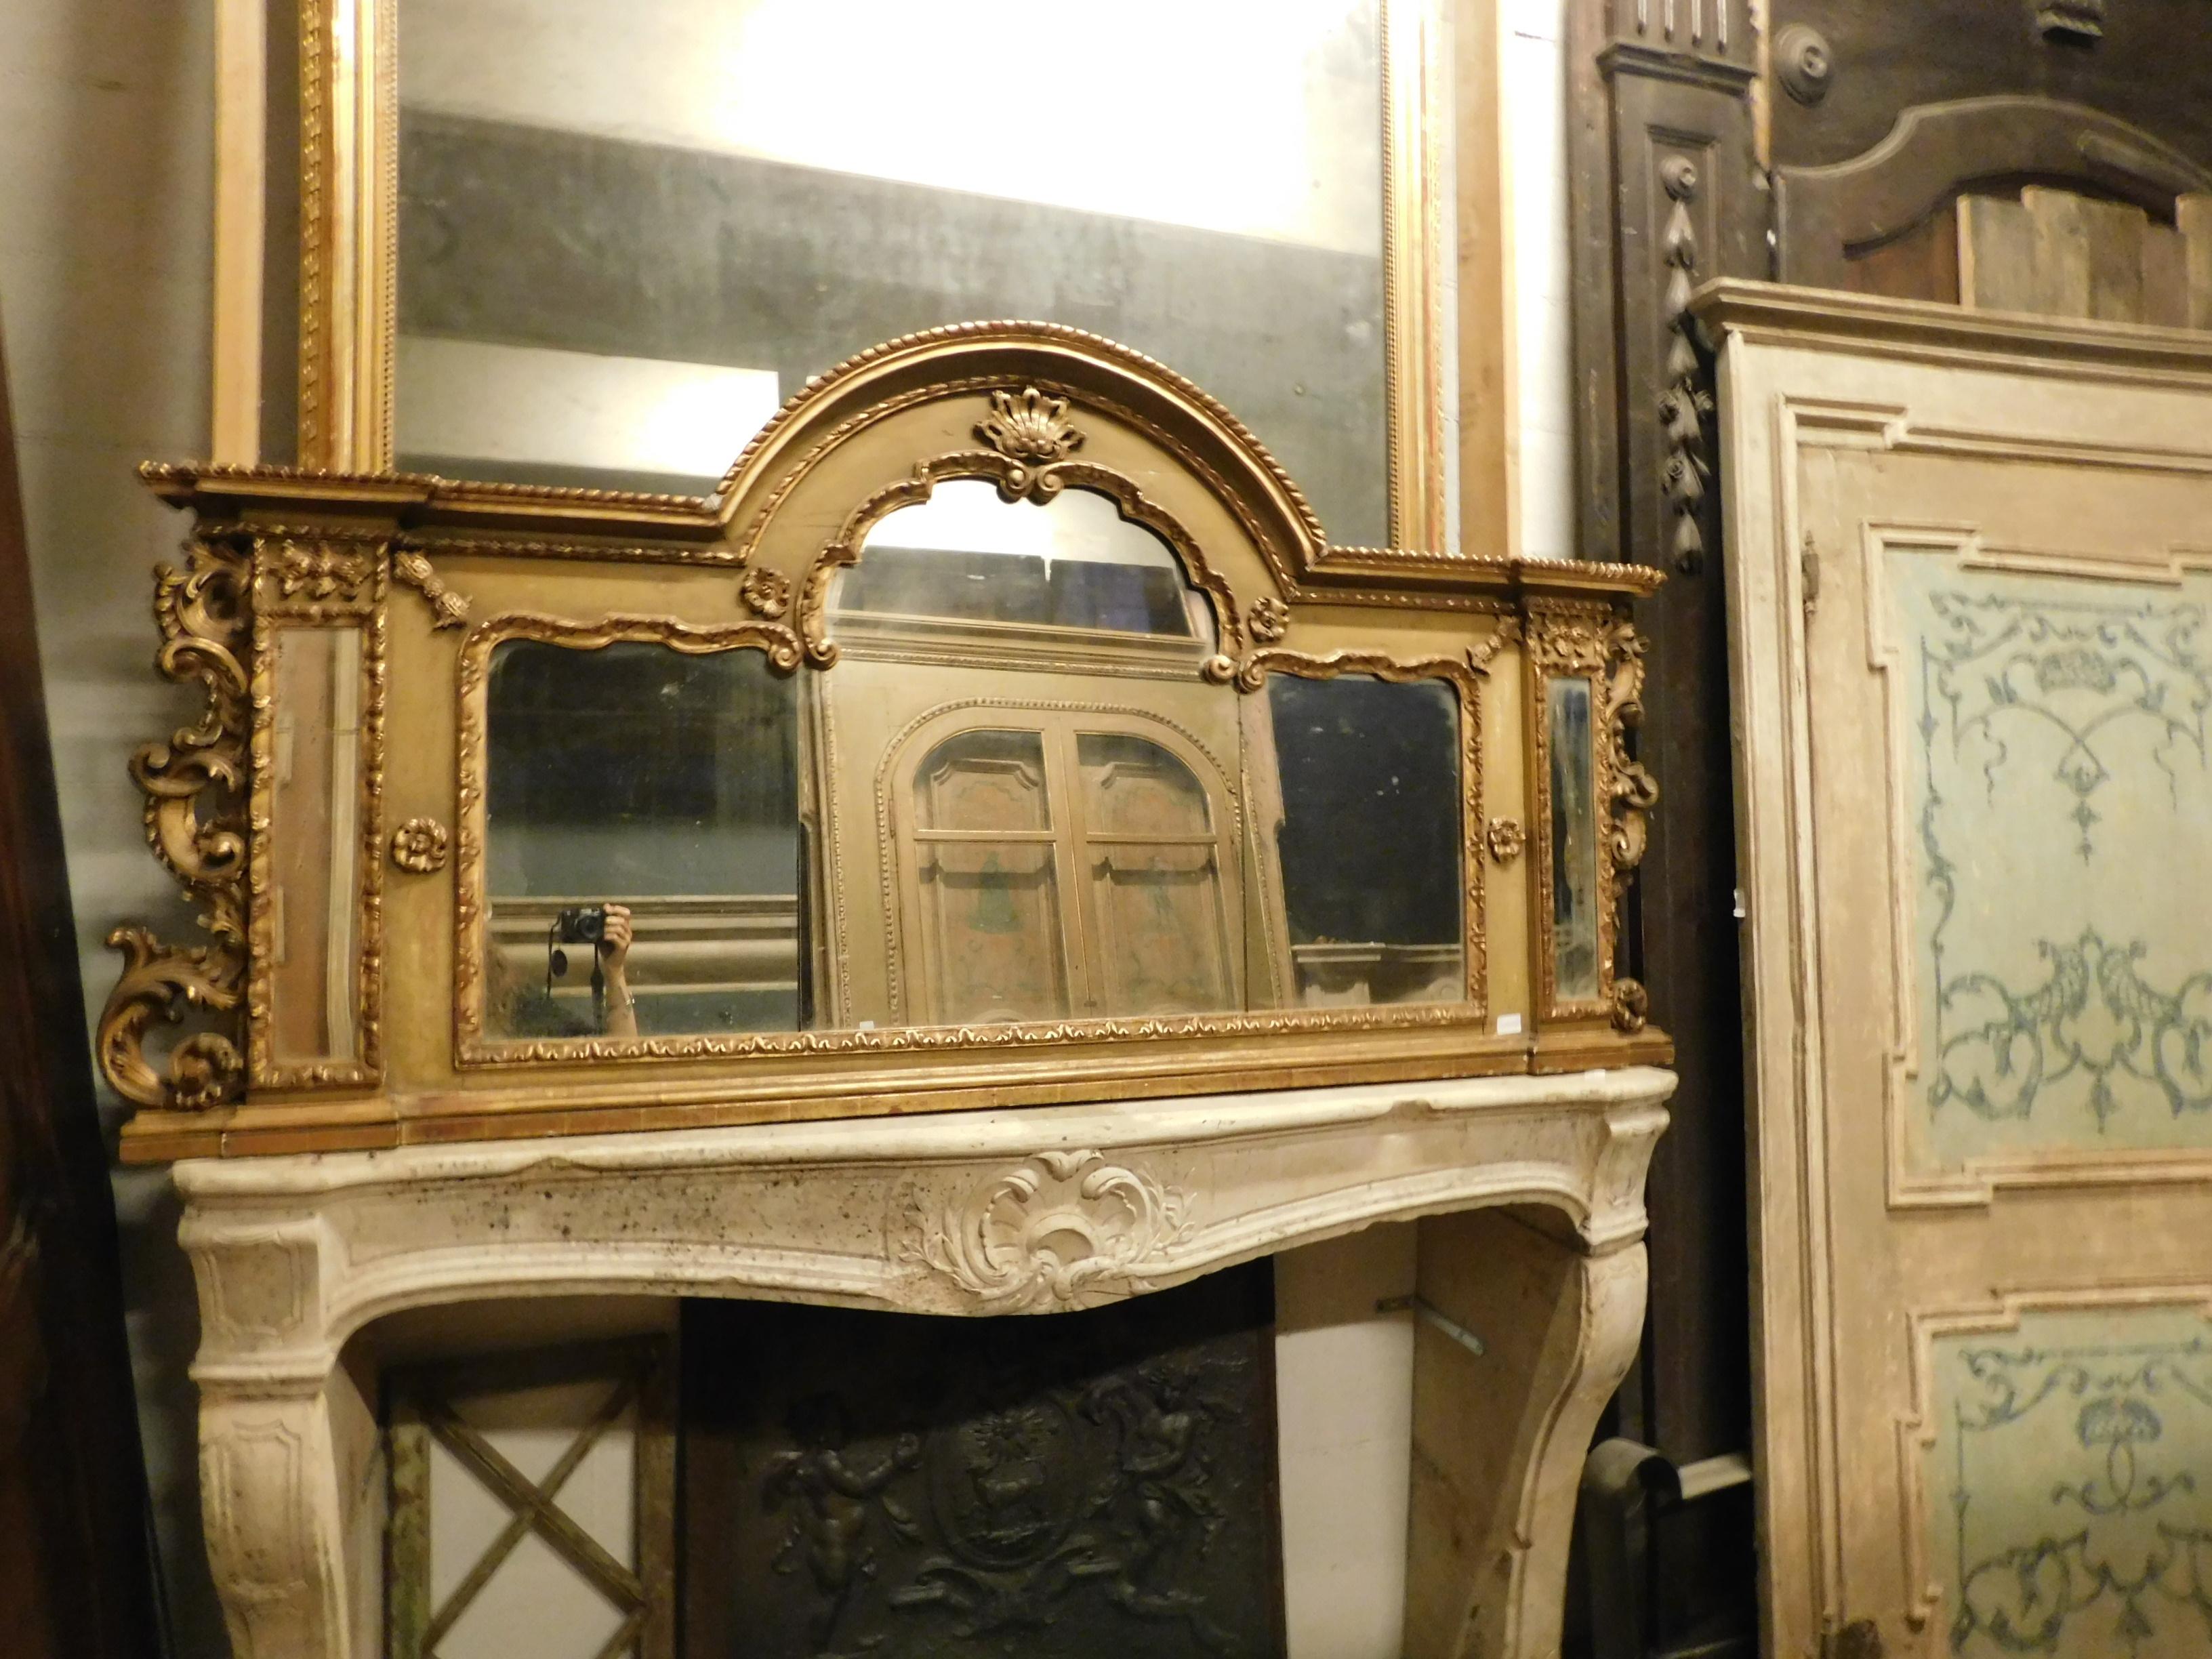 Antique wooden mirror, rectangular in shape with a central arch part, richly carved wooden frame, lacquered and gilded, decorations with flowers and shapes of the time, hand-built in the 20th century in Italy.
Ideal in a bathroom, given its shape,